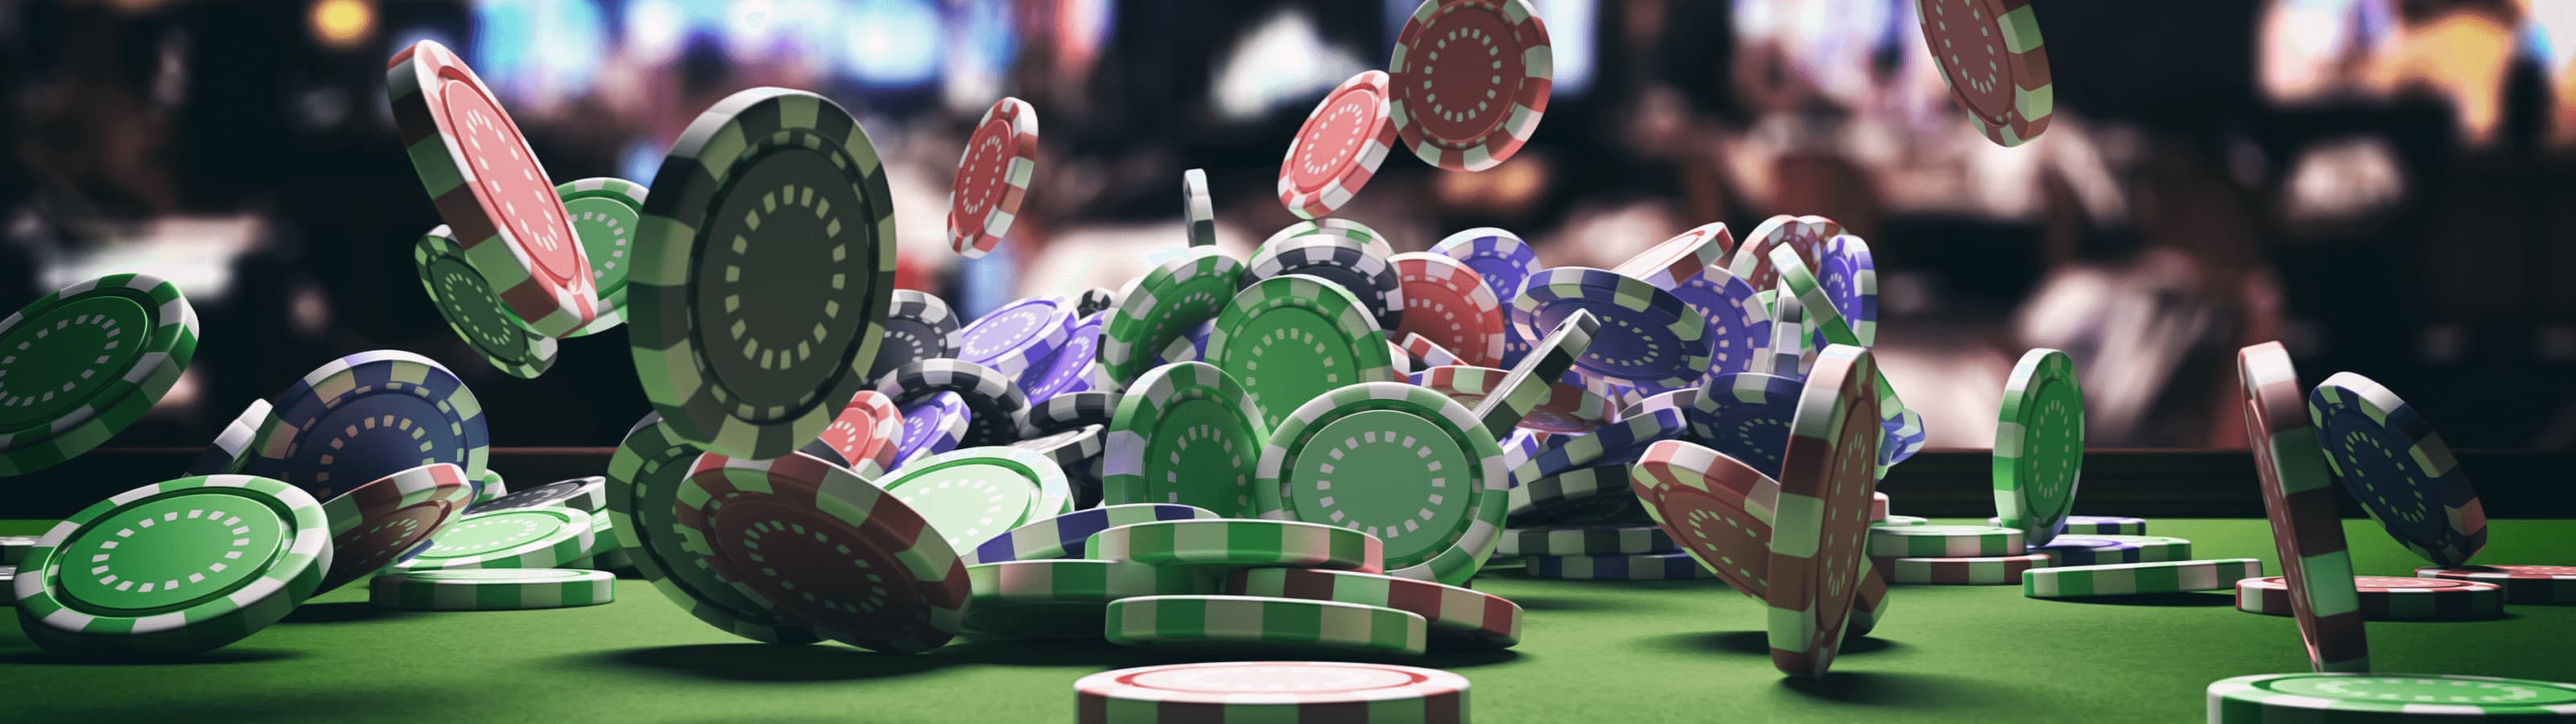 A vibrant and dynamic image showcasing an assortment of playing cards scattered with casino chips, each chip marked with different values, capturing the exciting atmosphere of a casino